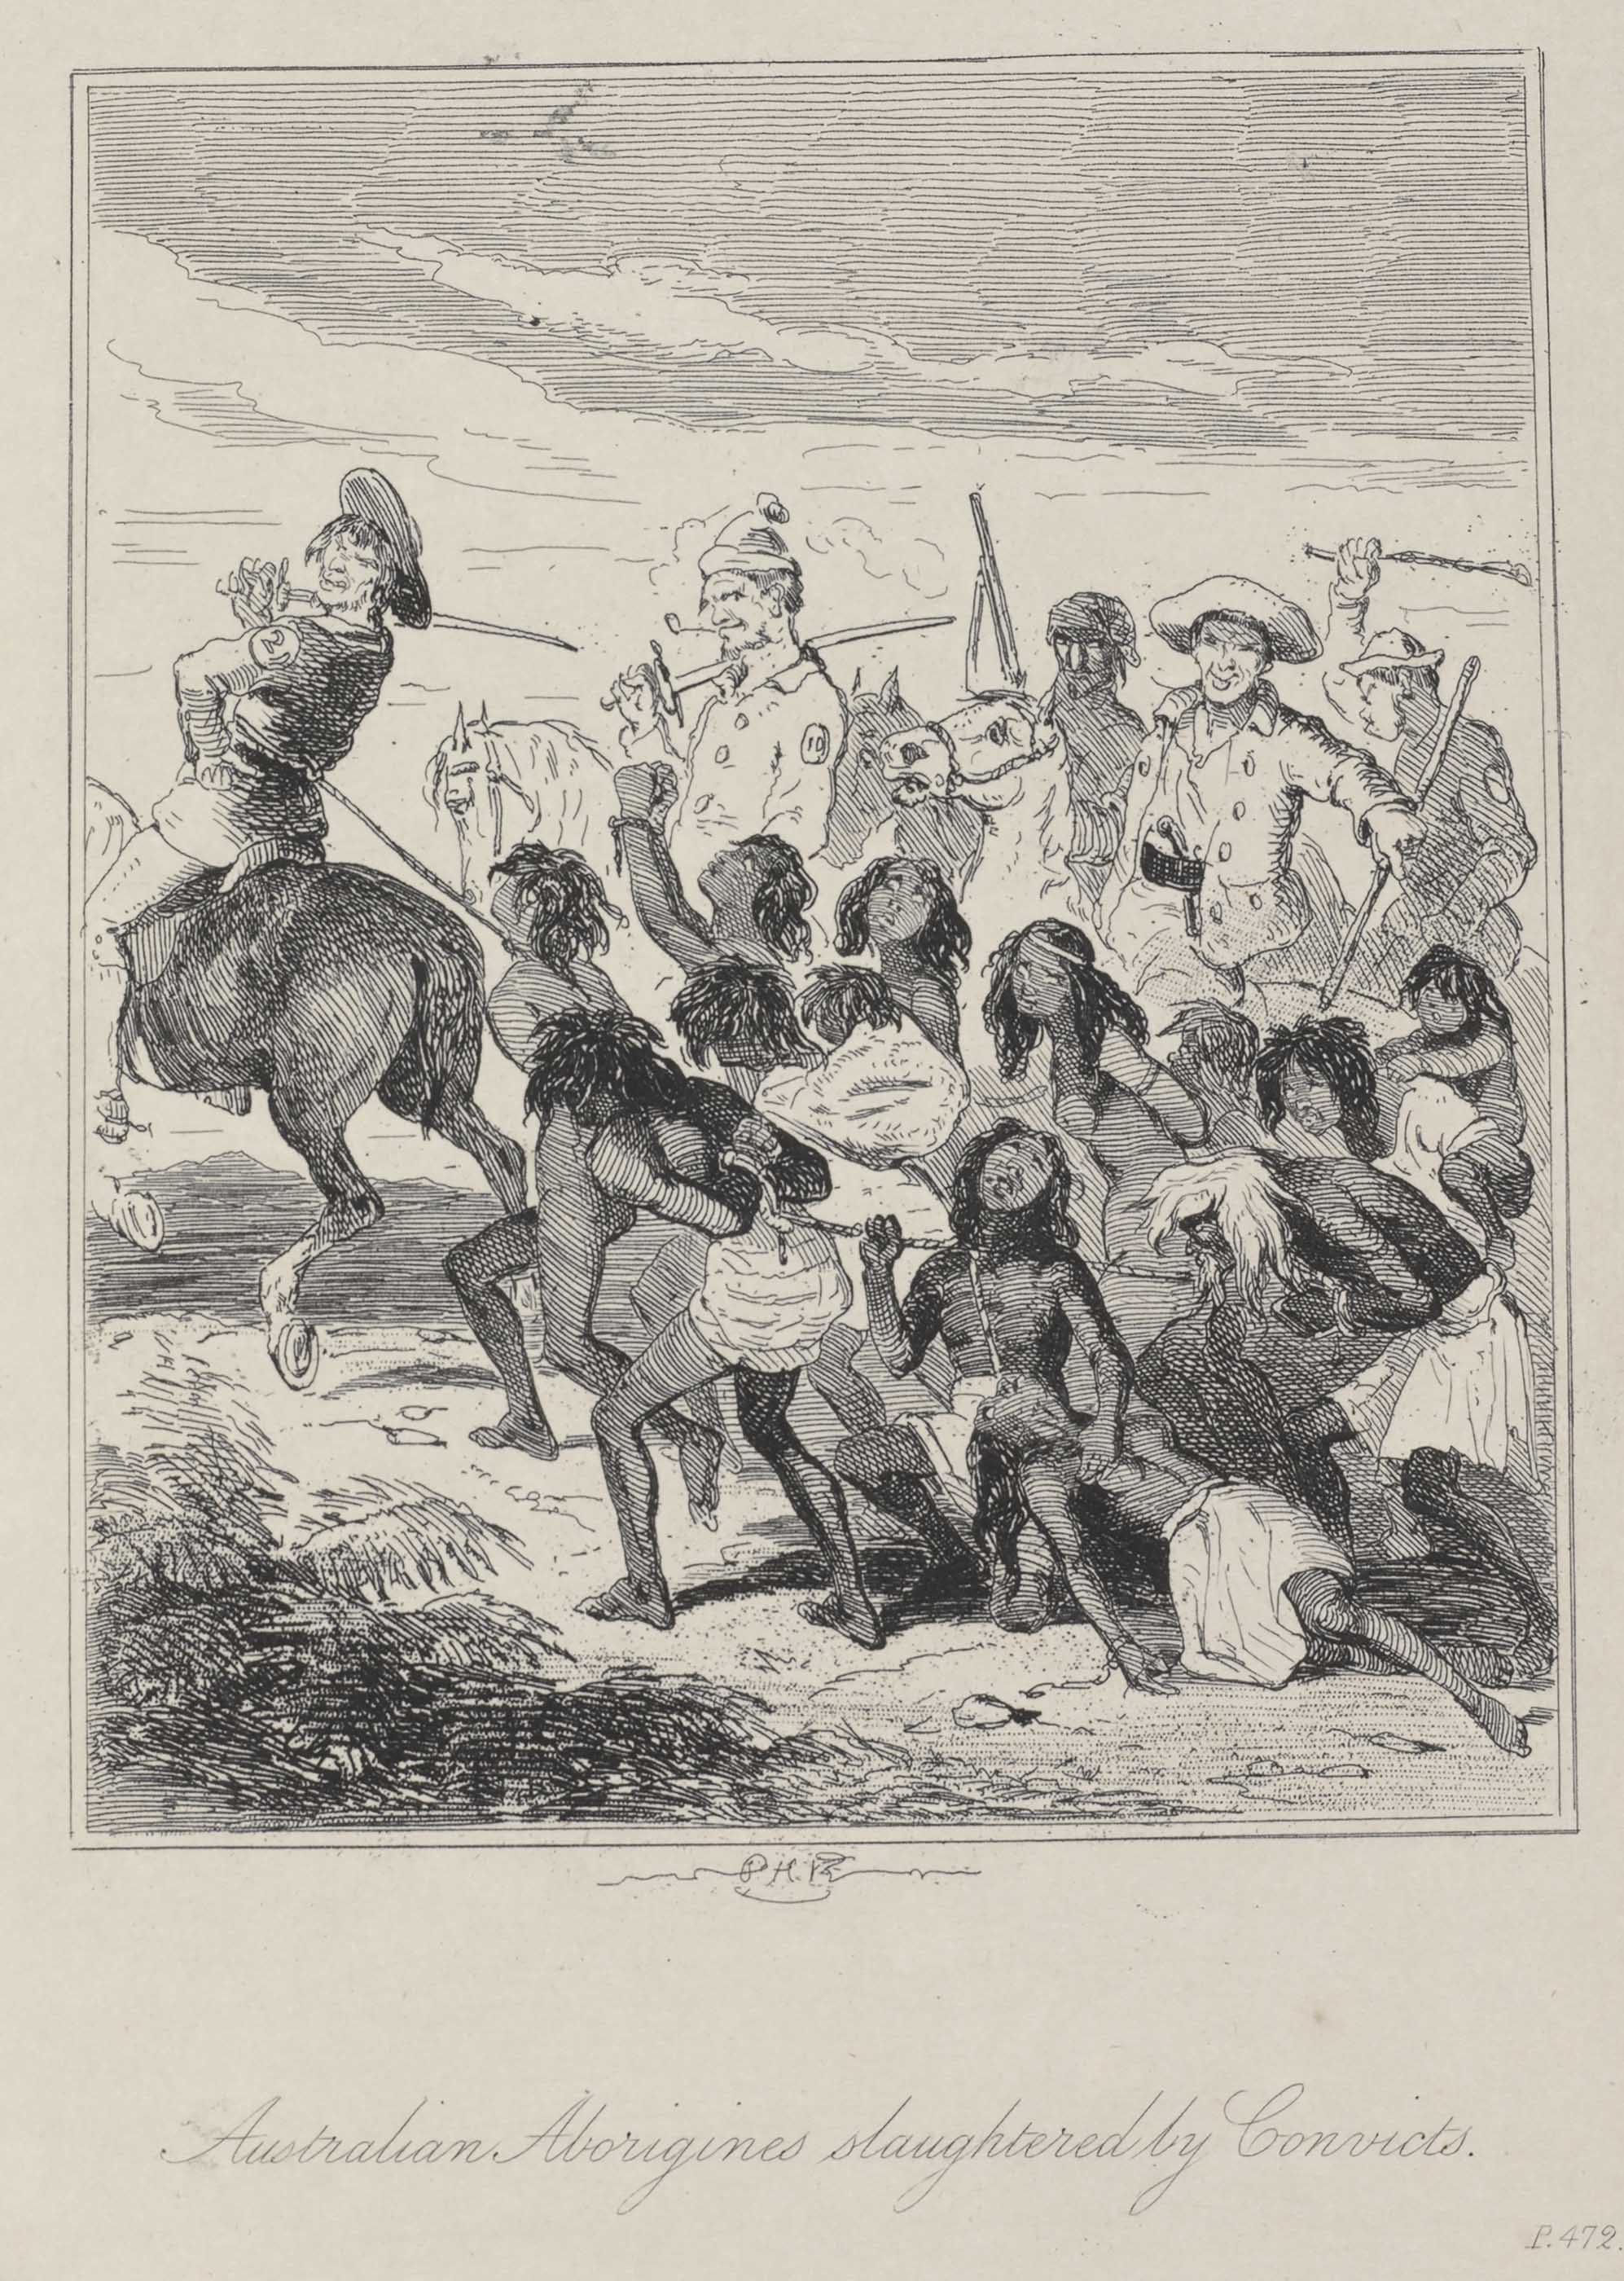 ‘Australian Aborigines Slaughtered by Convicts’, by Phiz, 184Os.